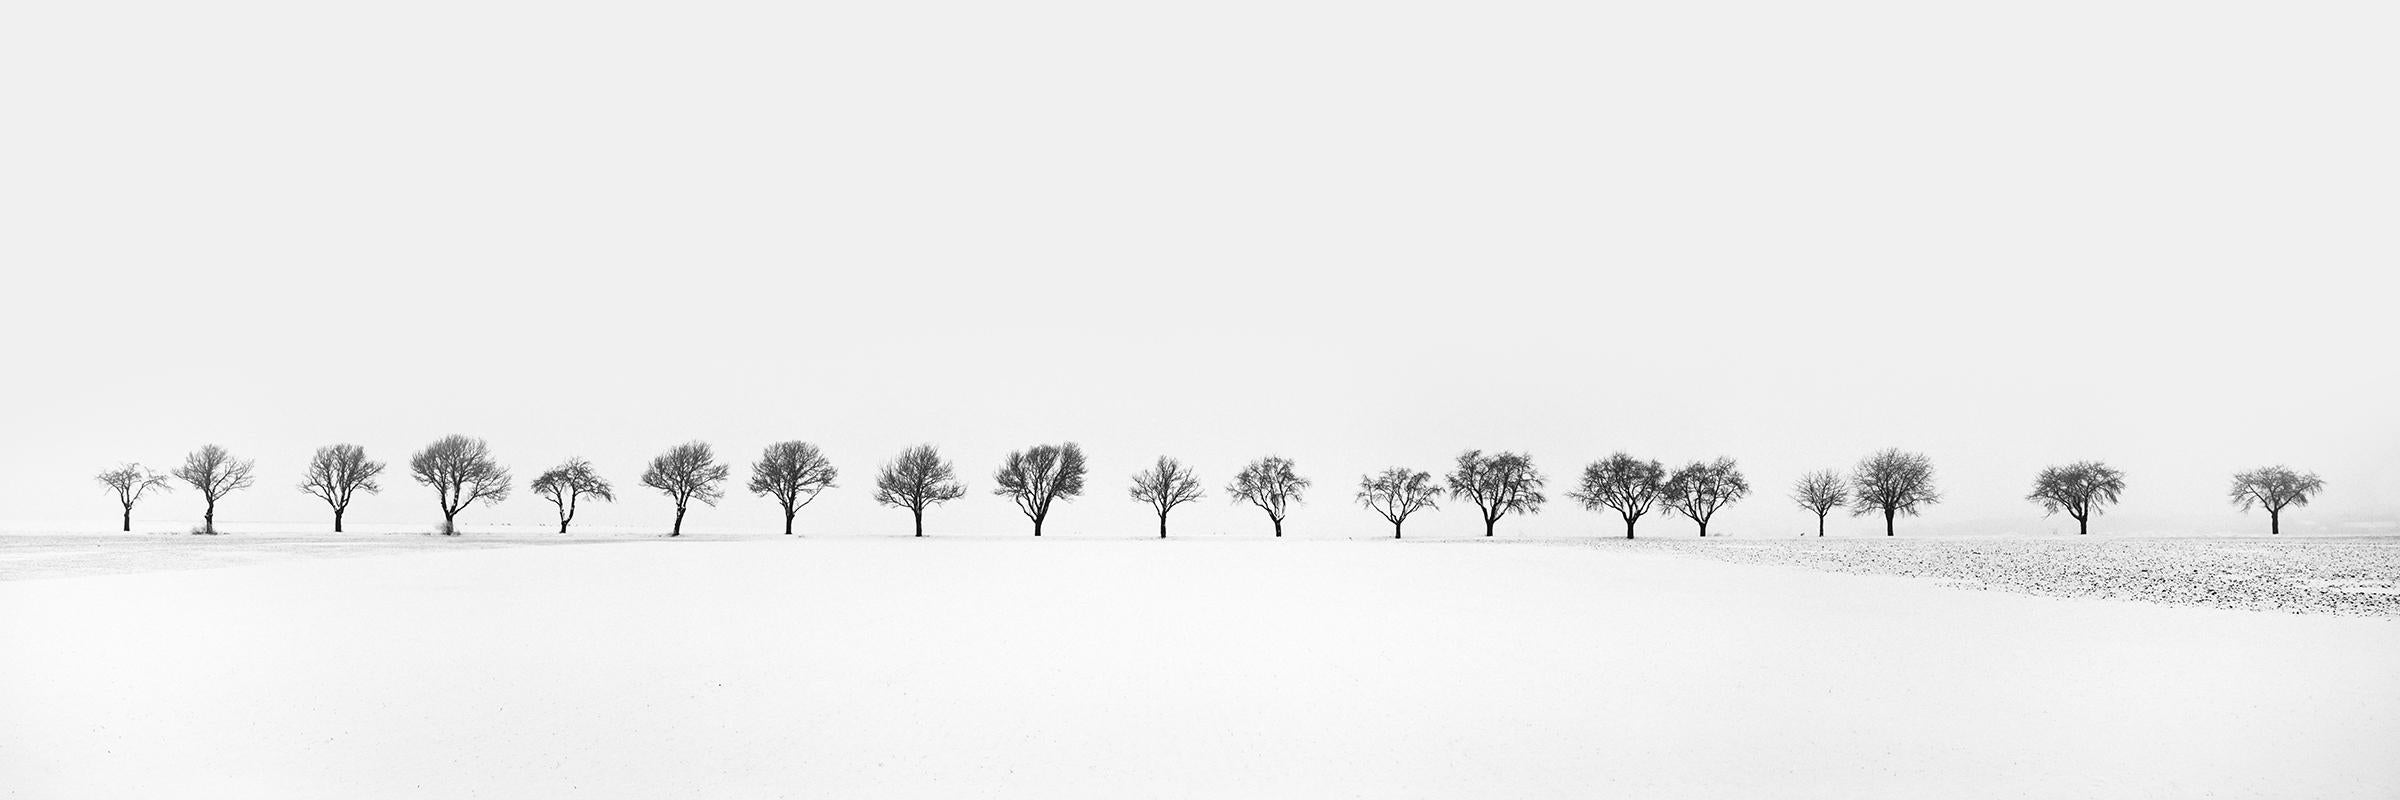 Gerald Berghammer Black and White Photograph - Cherry Trees in snow Field, Tree Avenue, black and white photography, landscape